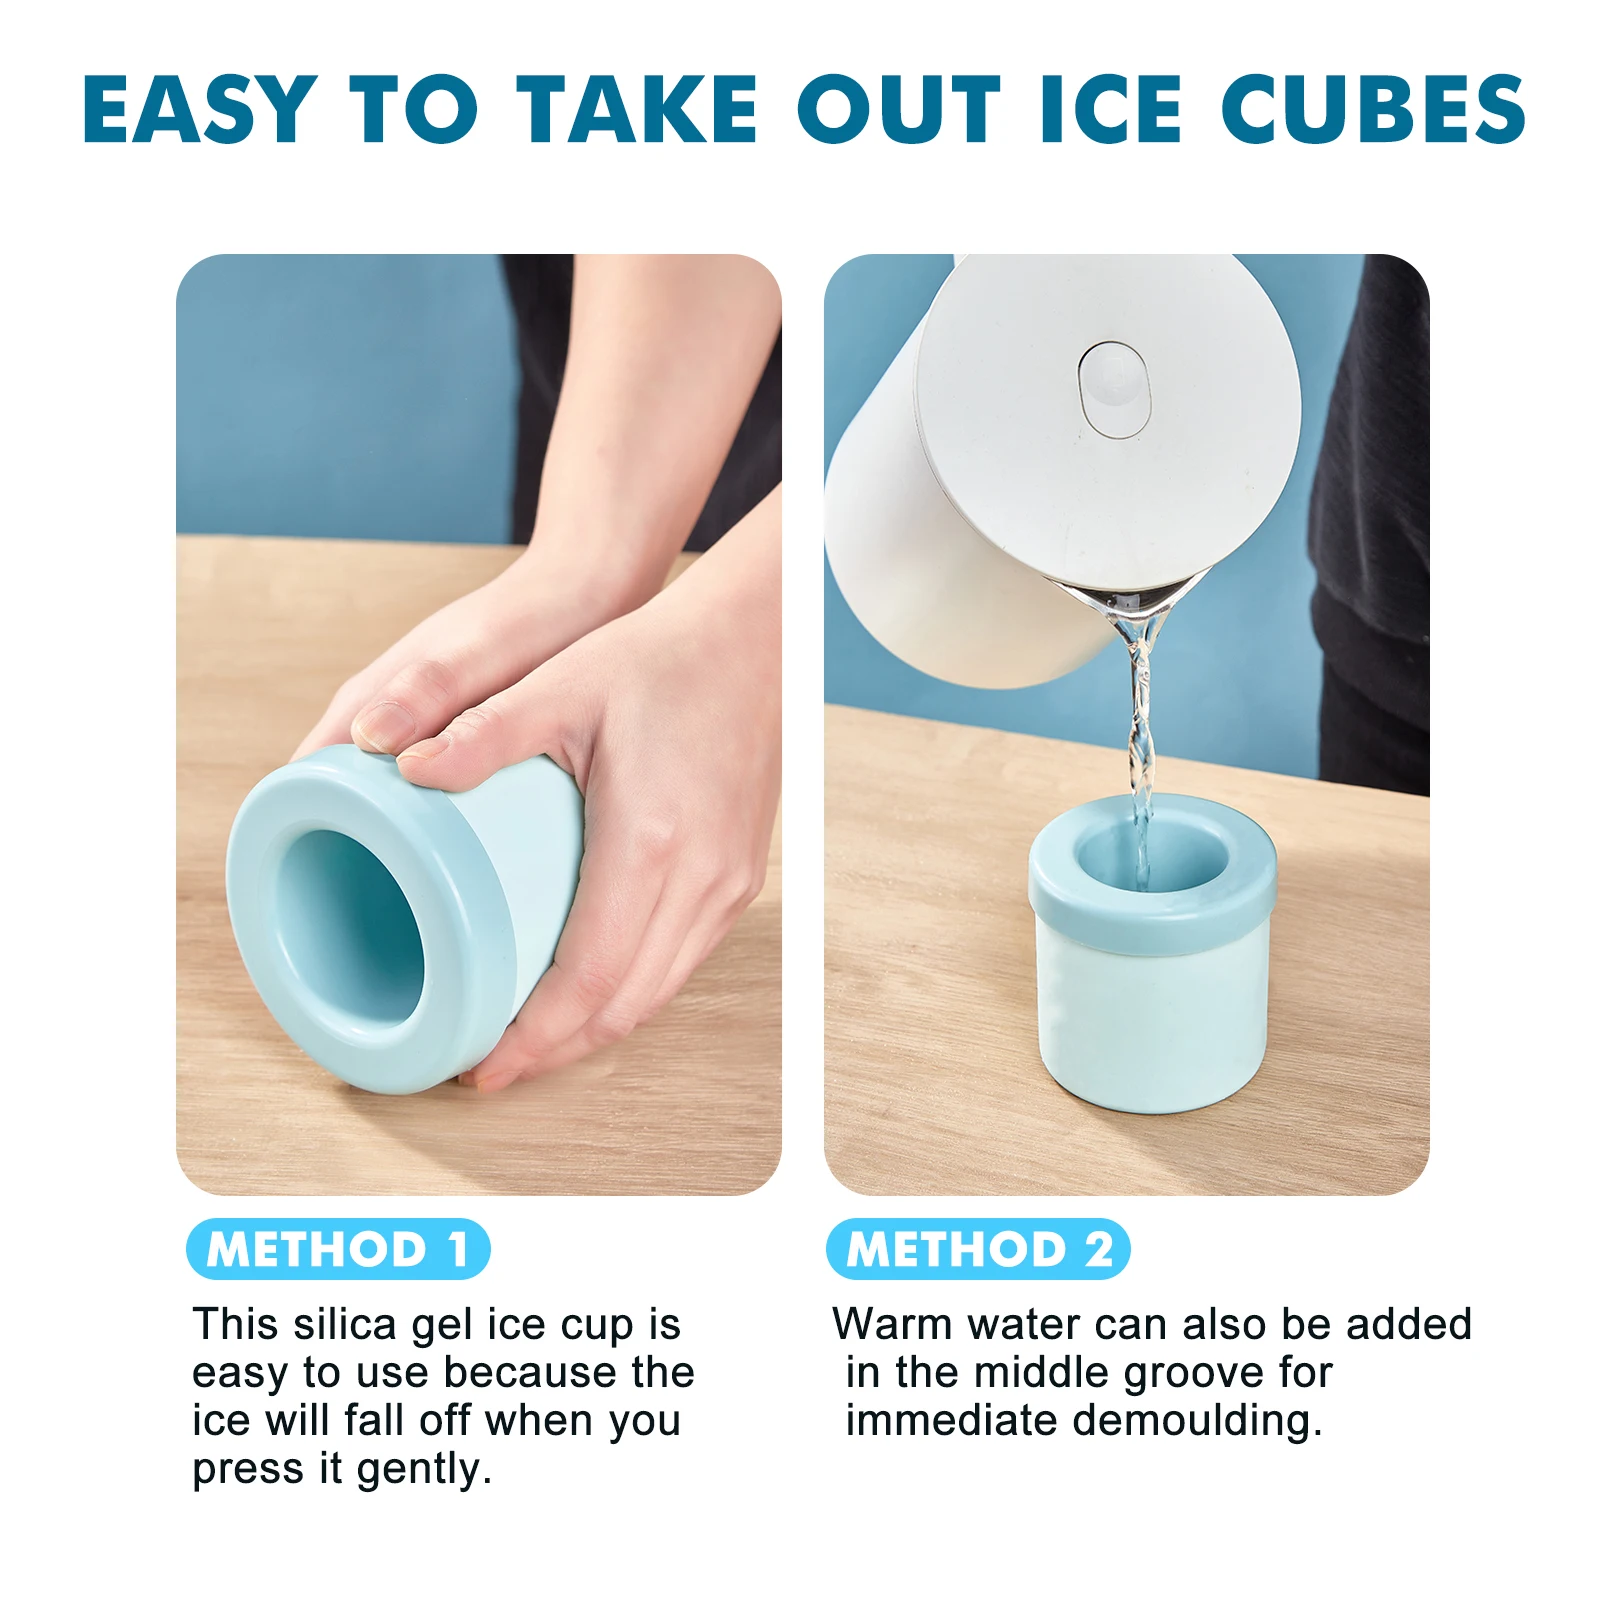 https://ae01.alicdn.com/kf/S6dfae18b05ab4cb1af5d6d494b080934L/Quickly-Freeze-Ice-Cubes-Tray-Mini-Cups-Ice-Bucket-Silicone-Ice-Making-Cup-Mold-Ice-Maker.jpg